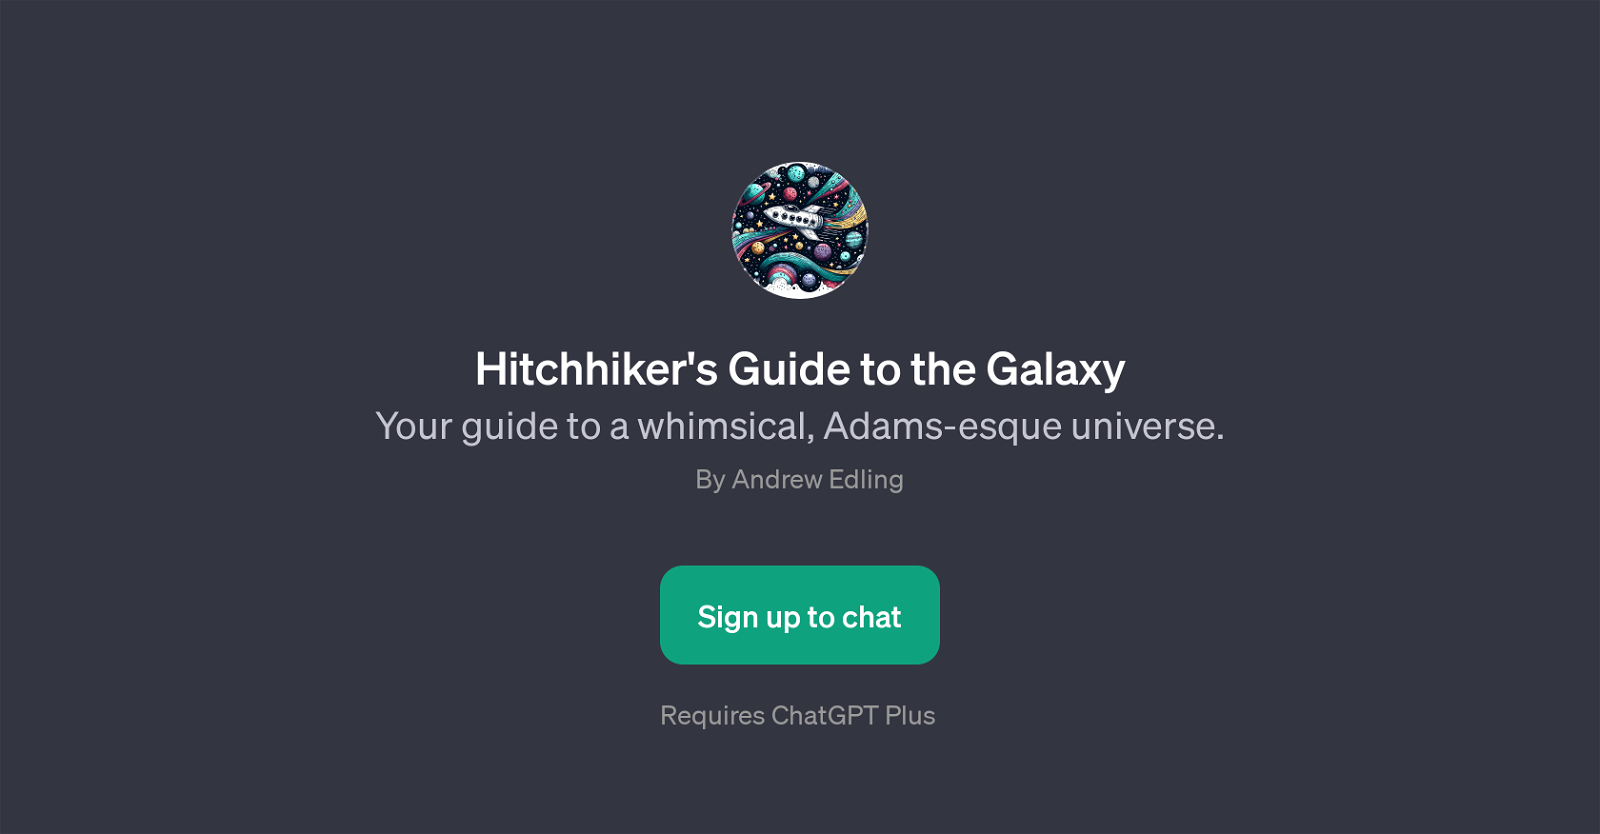 Hitchhiker's Guide to the Galaxy website